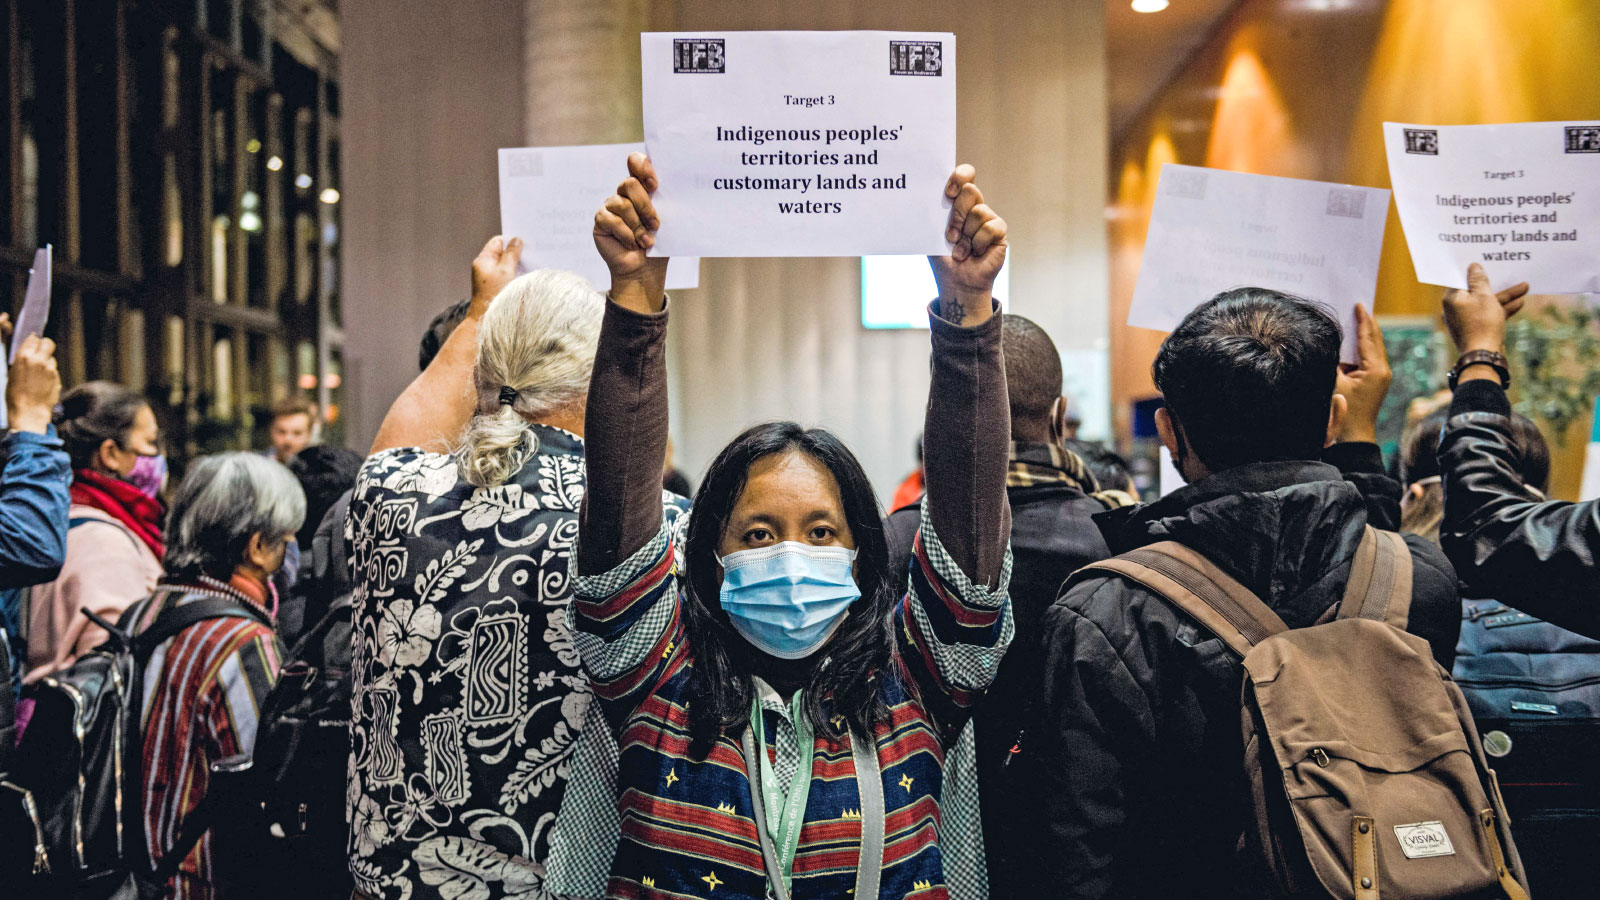 Indigenous person wearing a face mask standing in a crowd, holding sign at a protest at the UN biodiversity conference